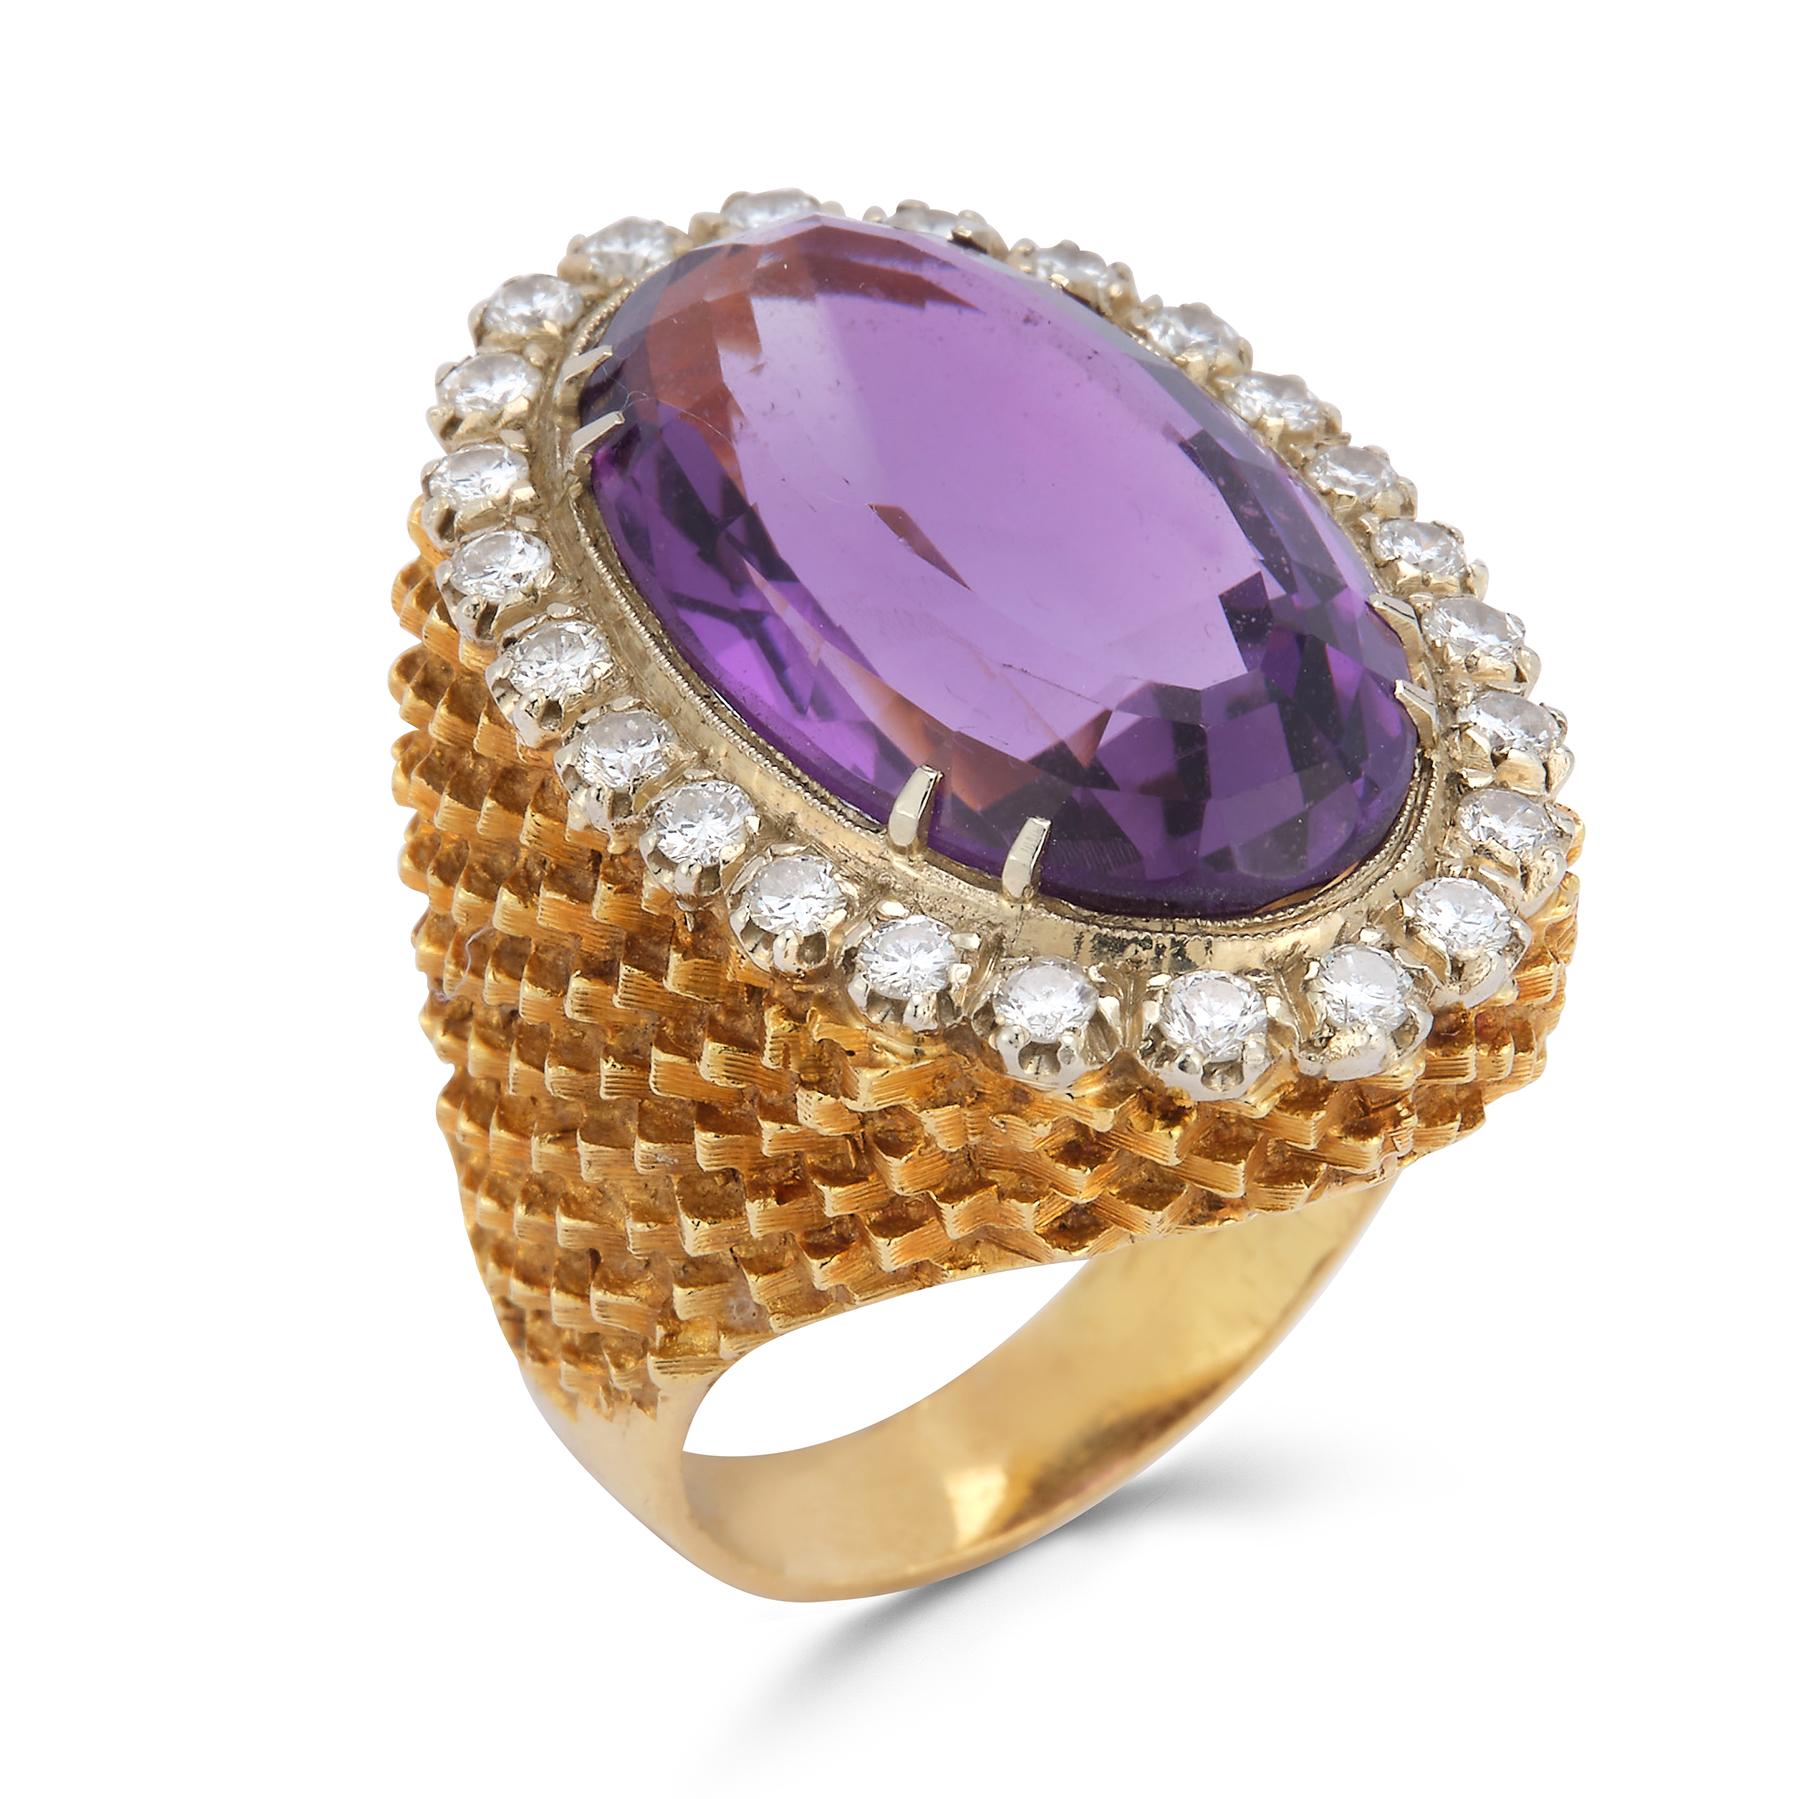 Oval Cut Amethyst & Diamond Cocktail Ring
1 oval cut center amethyst approximately 29.43 cts  
surrounded by round cut diamonds approximately 3.30 cts 

Set in 14k yellow gold.

Ring Size: 5